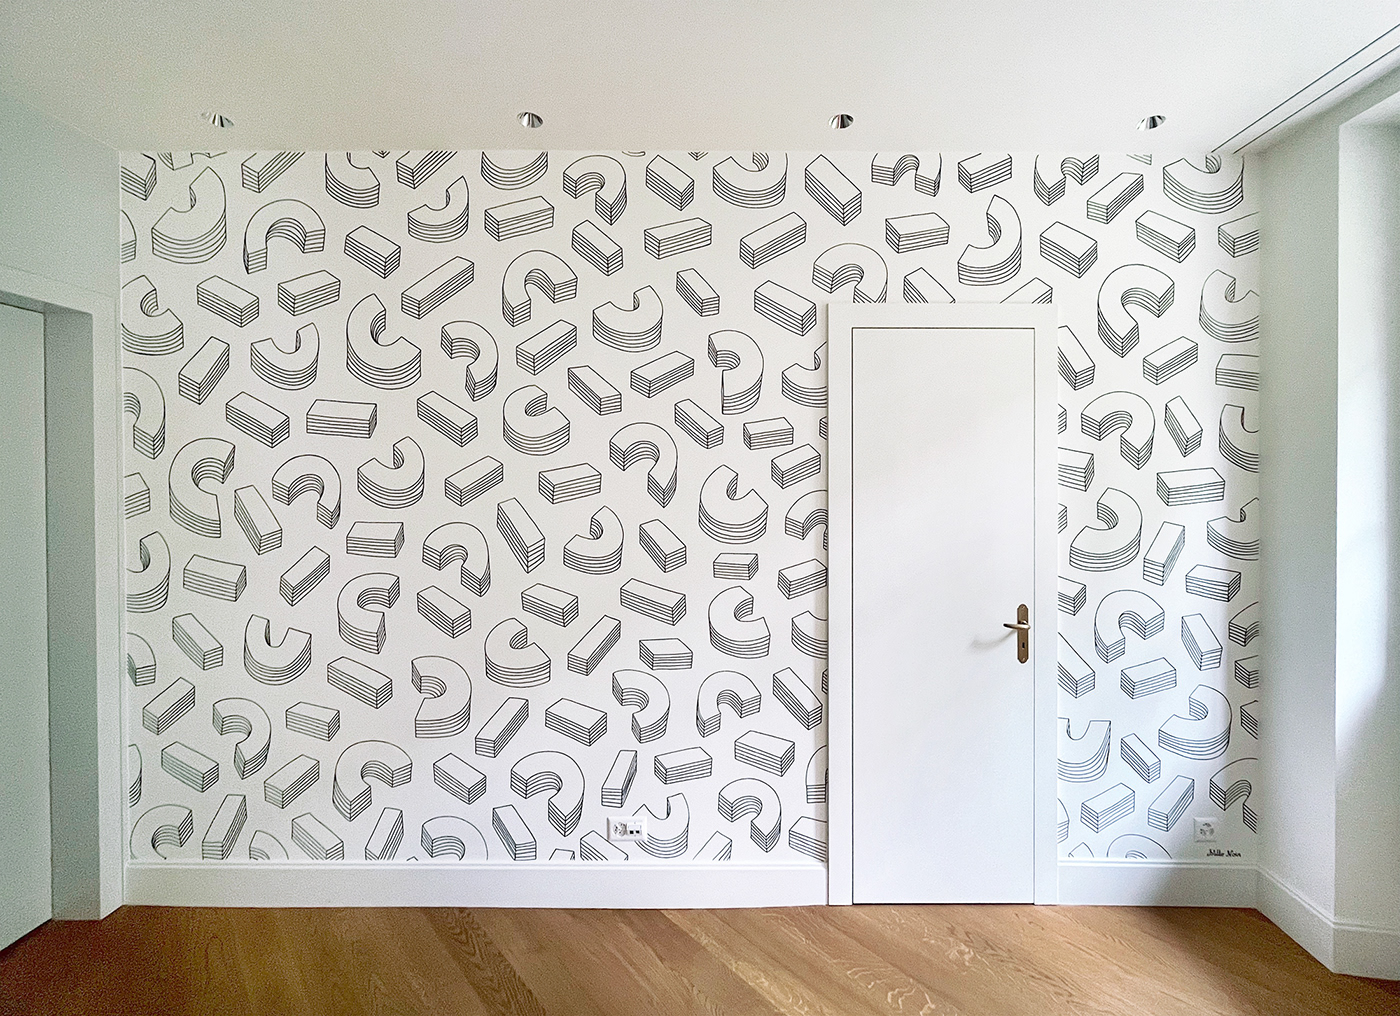 Black and white indoor mural for a child / baby bedroom in Switzerland, by Stillo Noir.